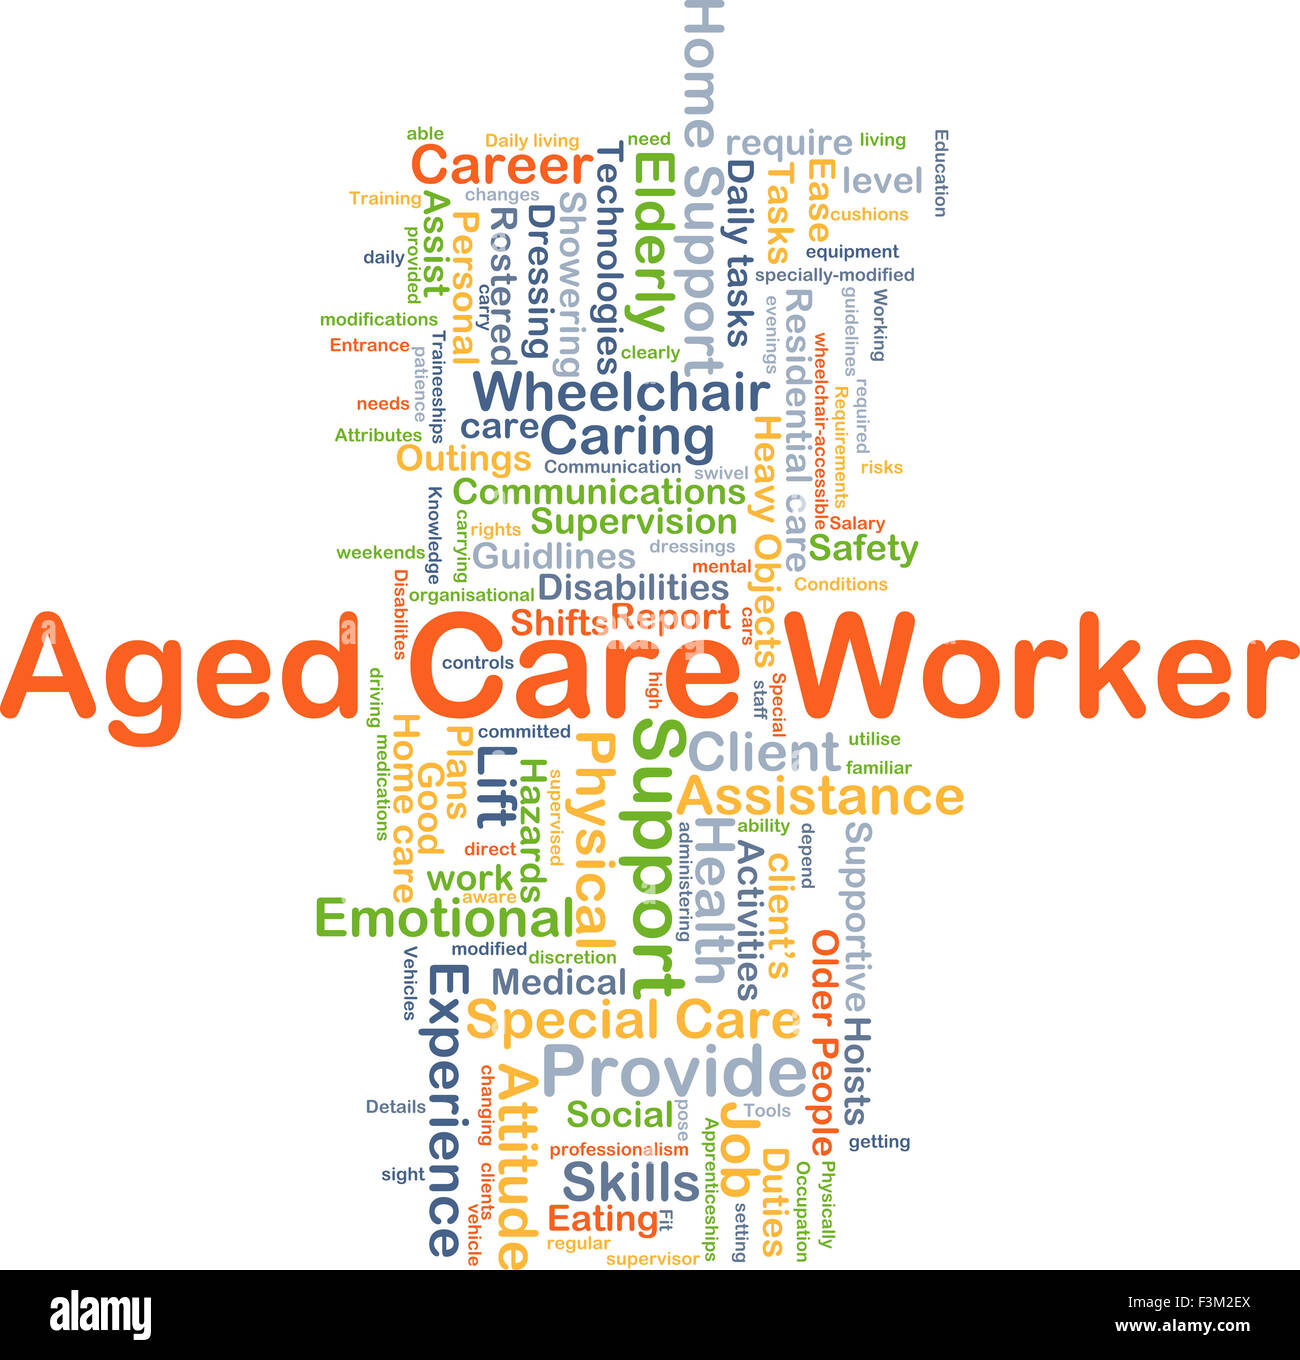 Background concept wordcloud illustration of aged care worker Stock Photo